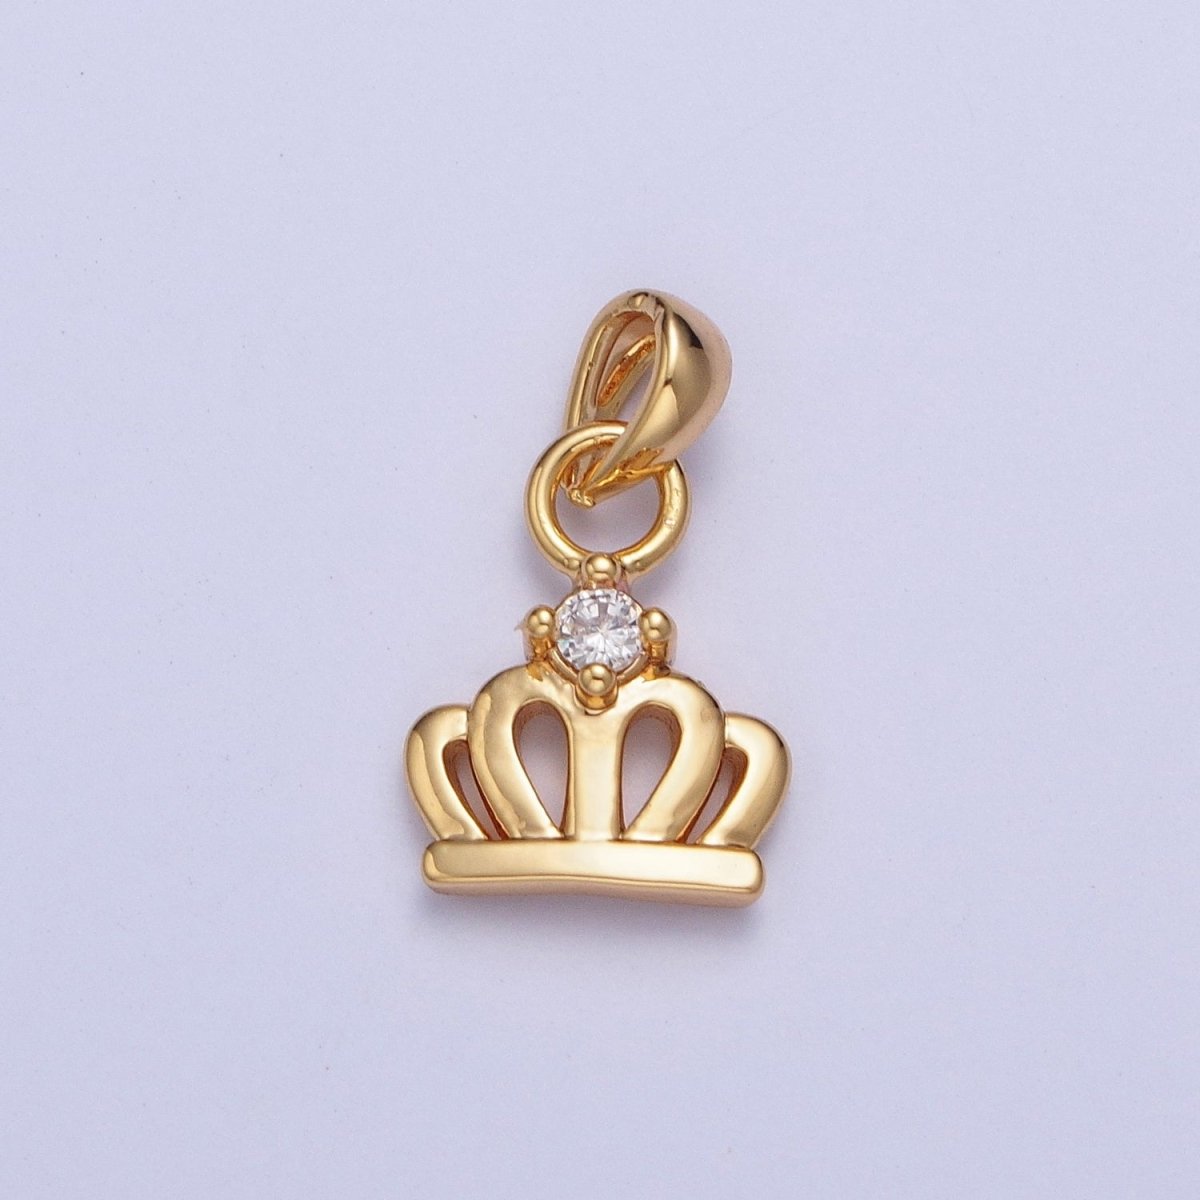 Mini 24K Gold Filled Royalty Crown with Cubic Zirconia Pendant Charm For Jewelry Making X-454 - DLUXCA